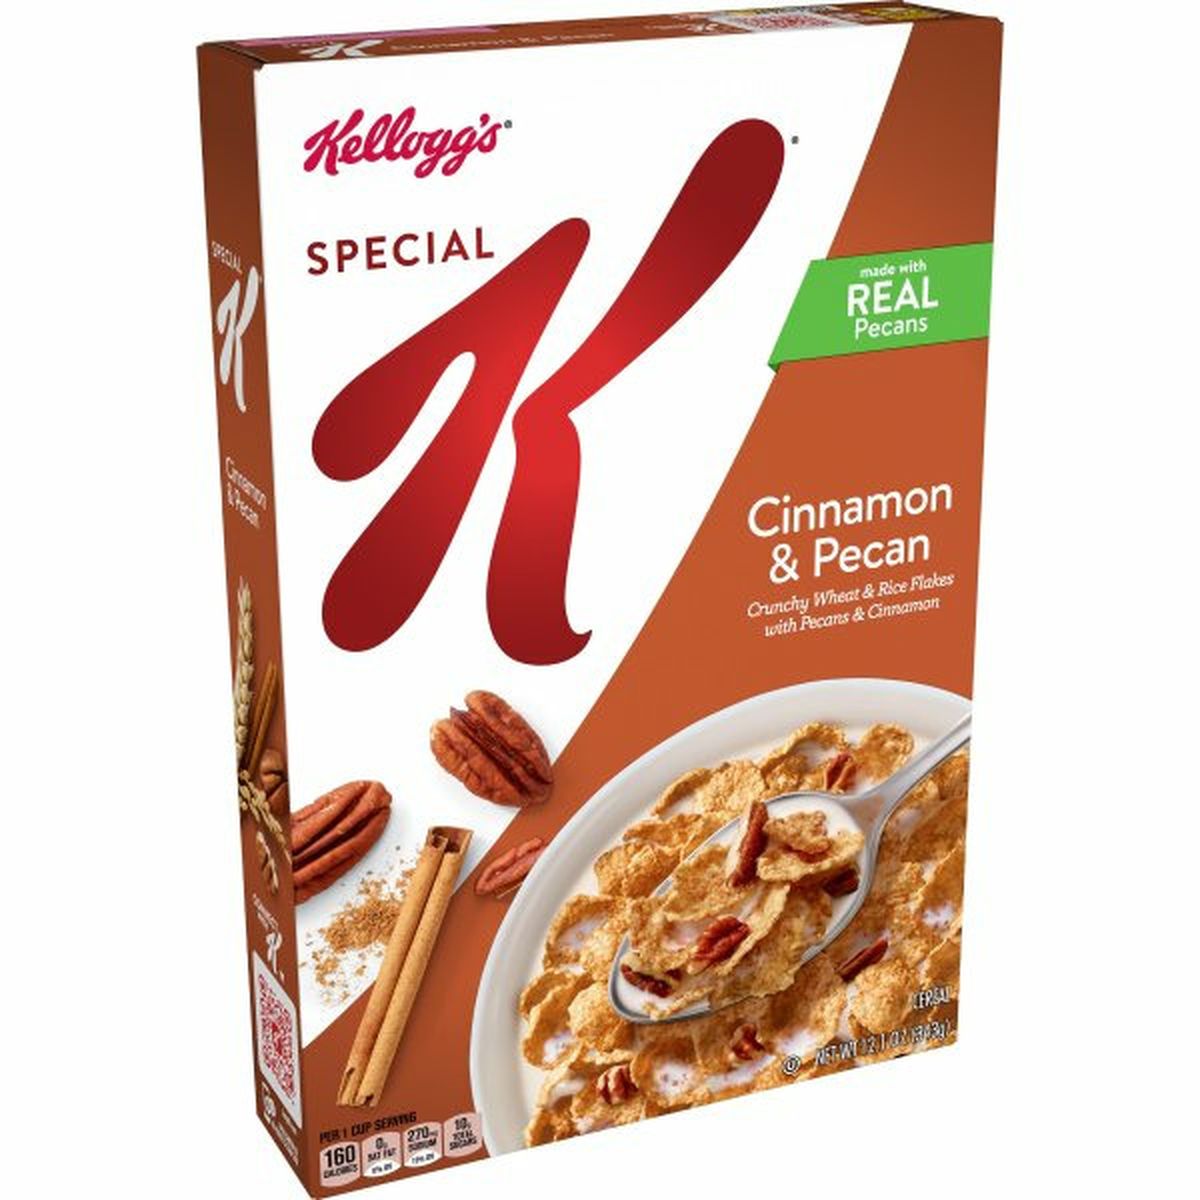 Calories in Kellogg's Special K Cereal Kellogg's Special K Breakfast Cereal, Cinnamon and Pecan, Made with Real Pecans, 12.1oz